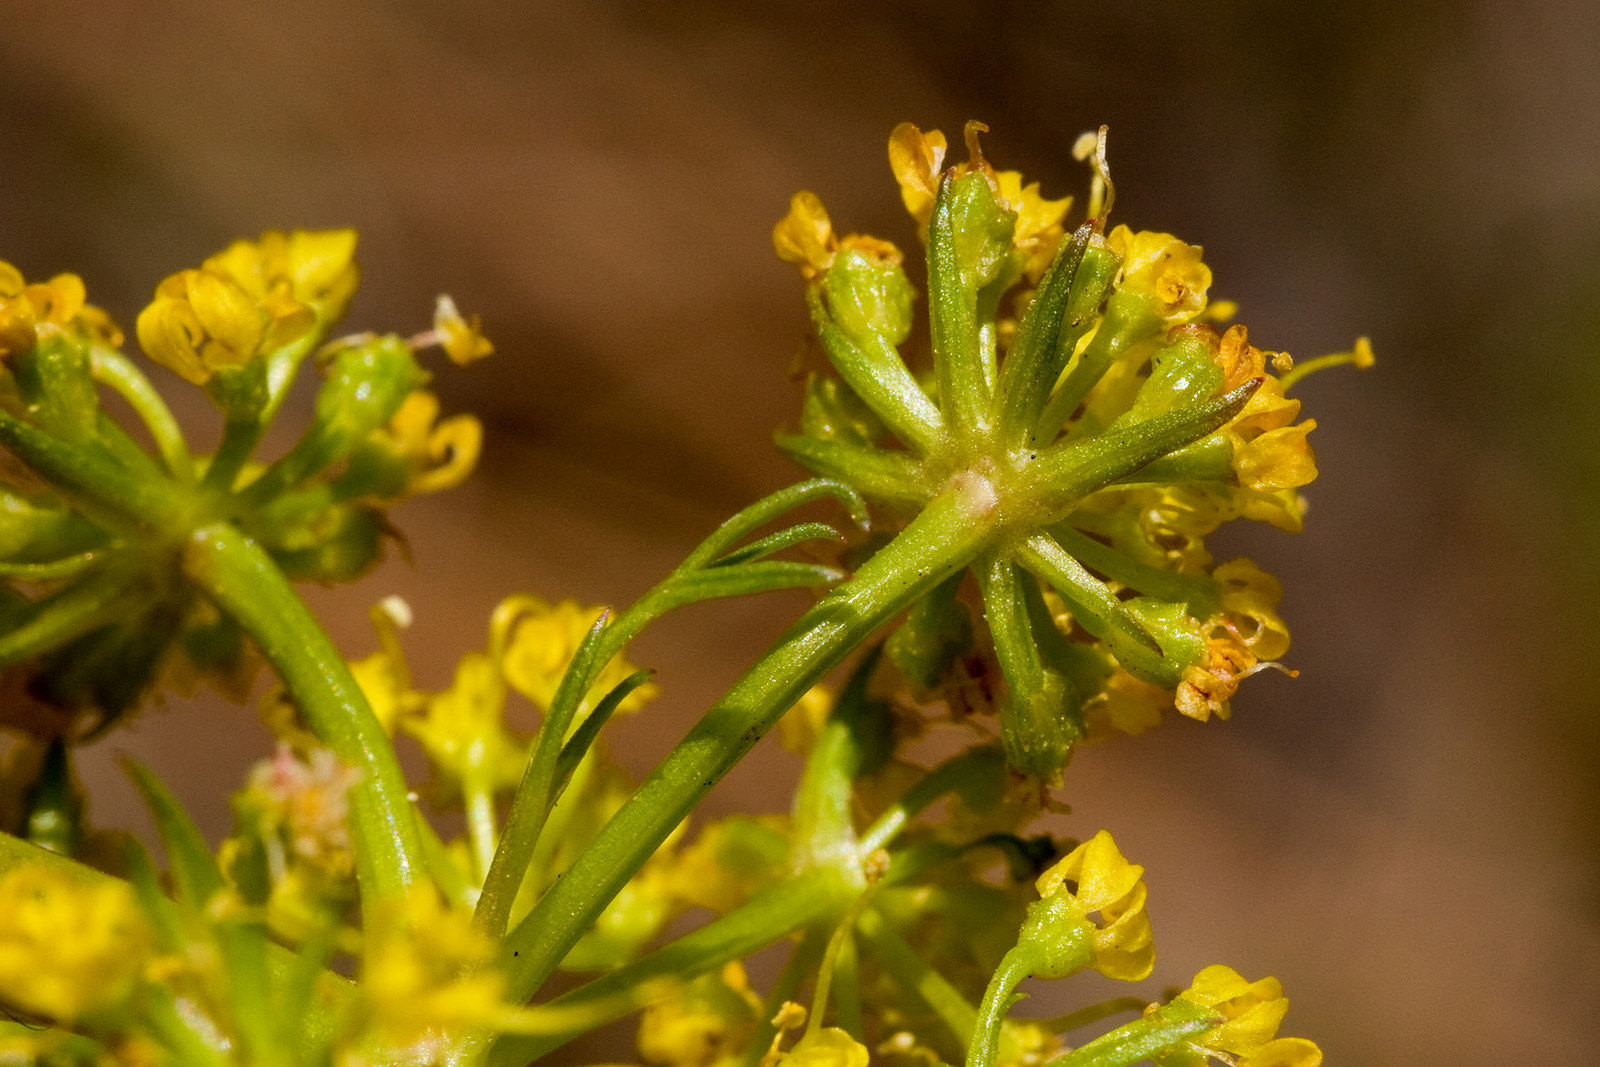 Underside of flower cluster, showing umbel shape and yellow petals